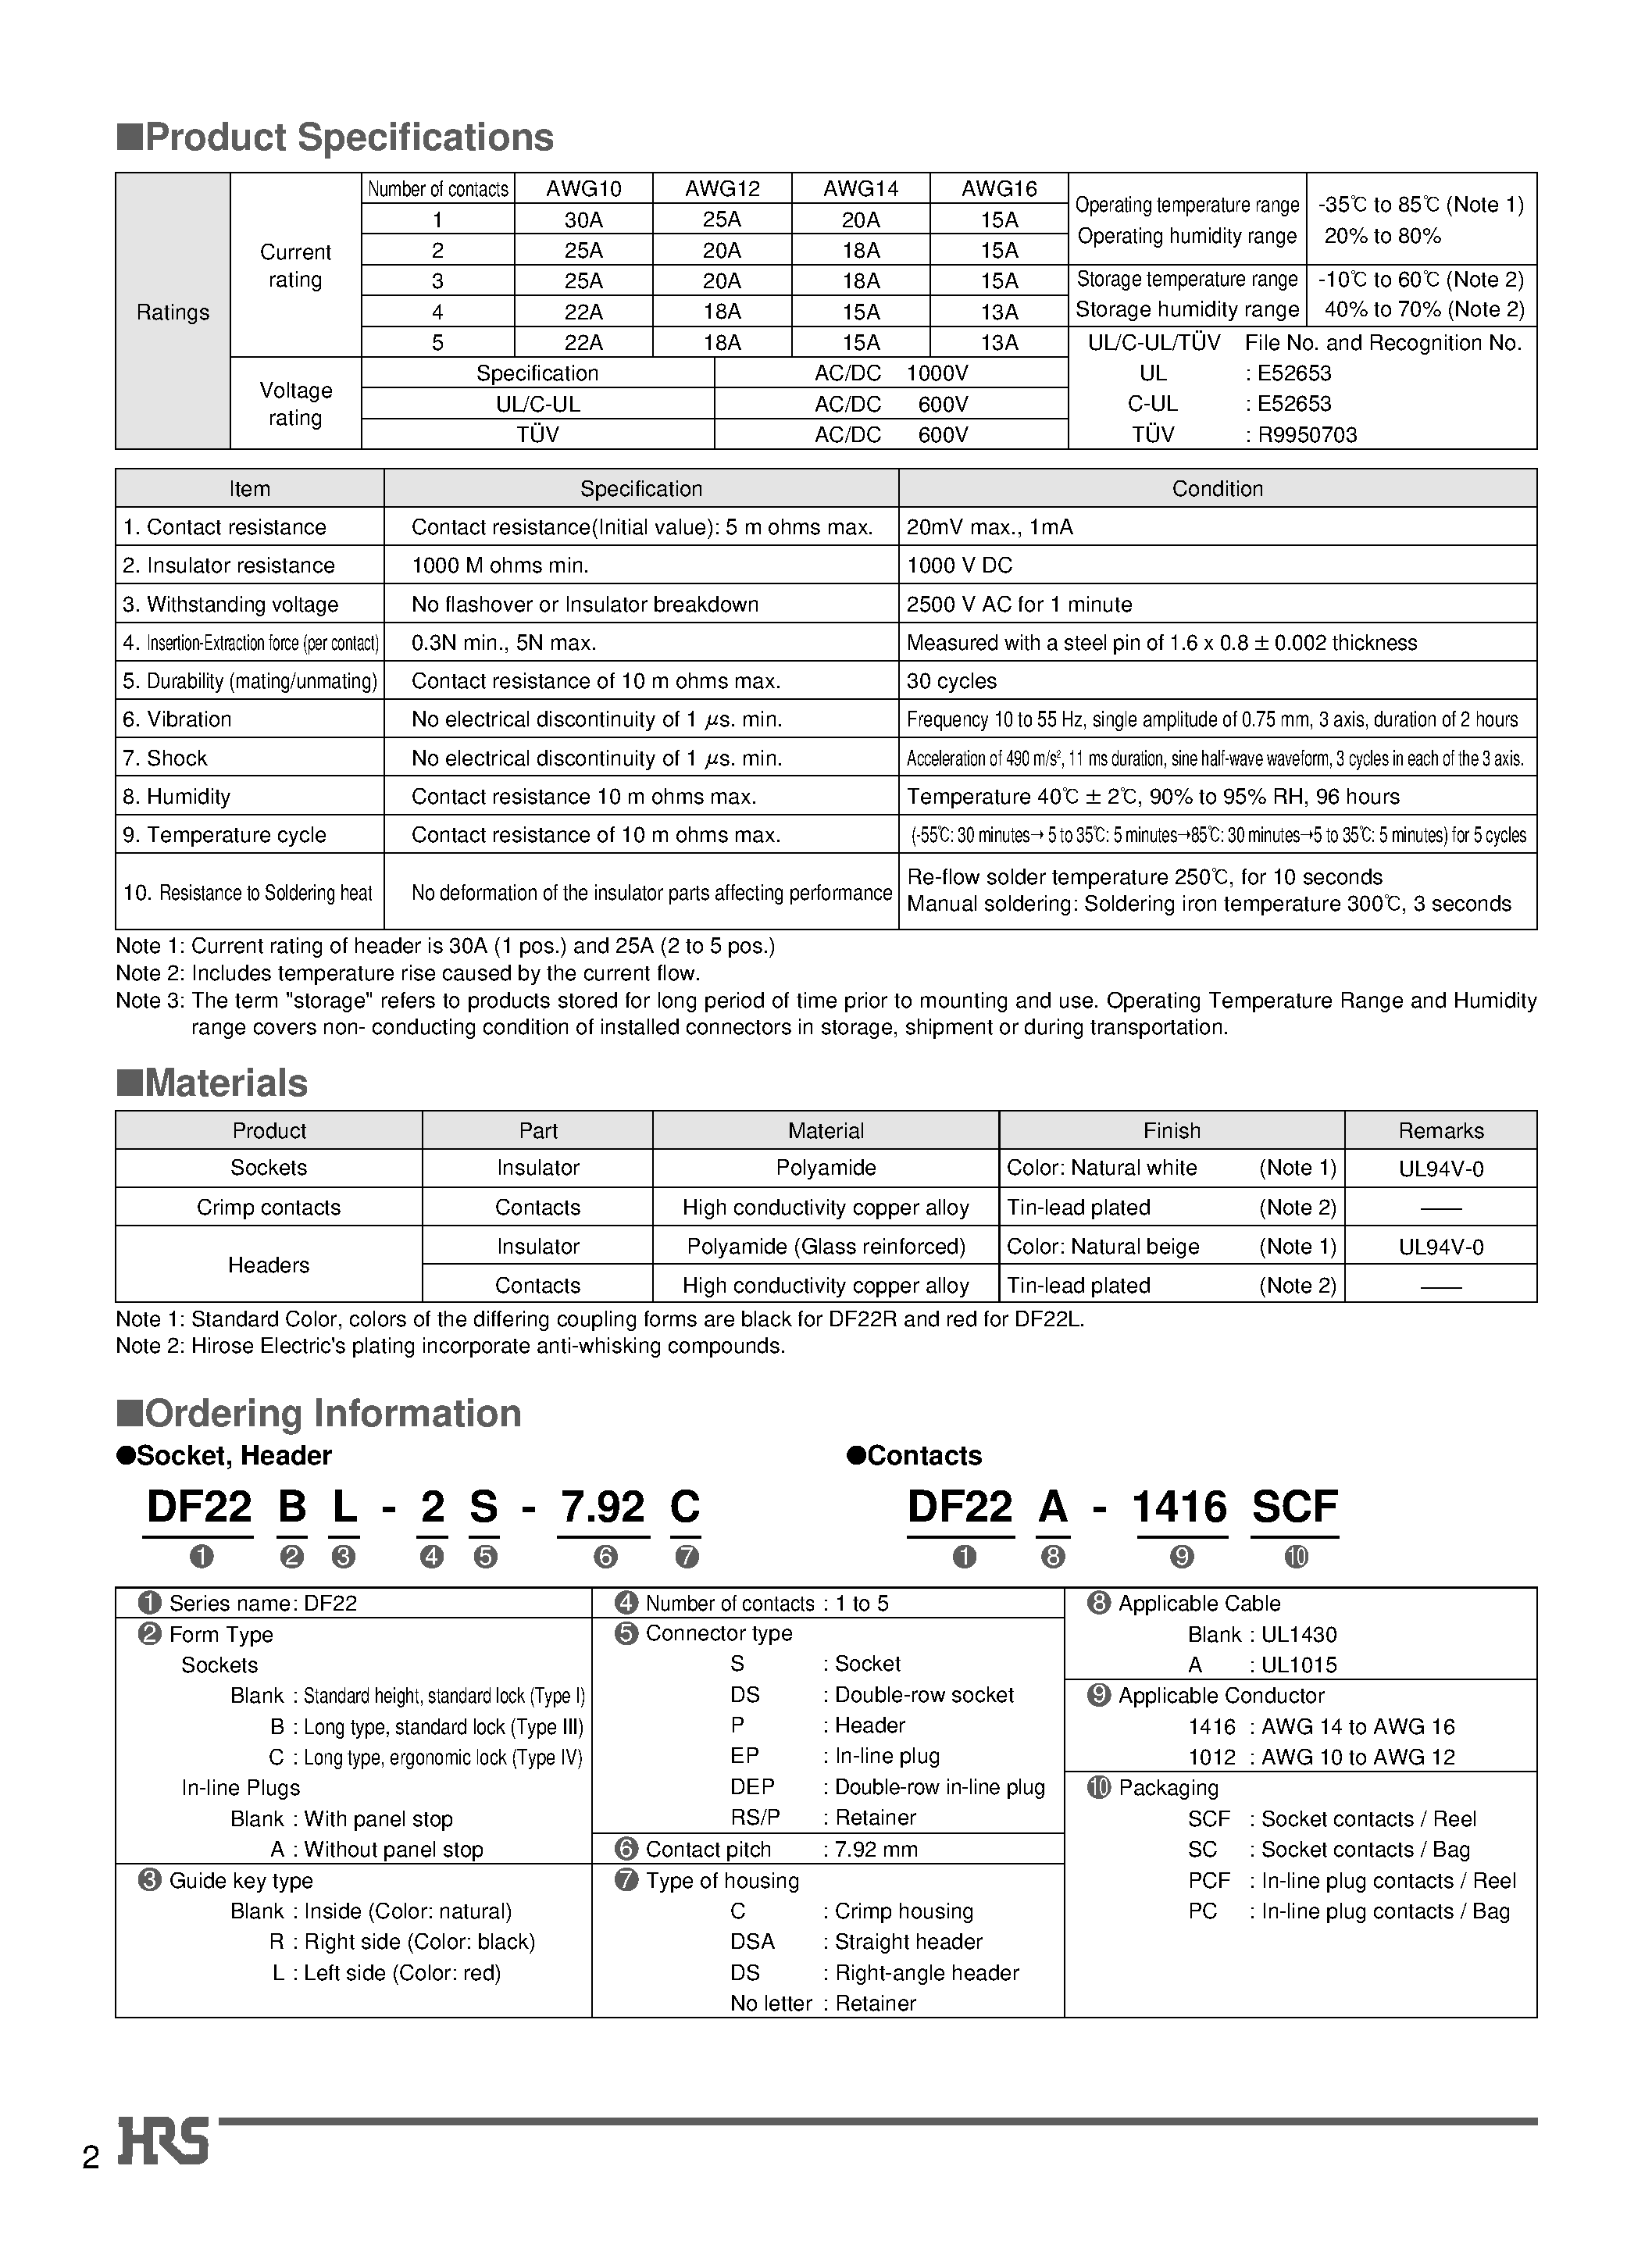 Datasheet DF22-4RS/P-7.92 - 7.92 mm Contact Pitch/ High-Current Connectors for Internal Power Supplies (UL/ C-UL and TUV Listed) page 2